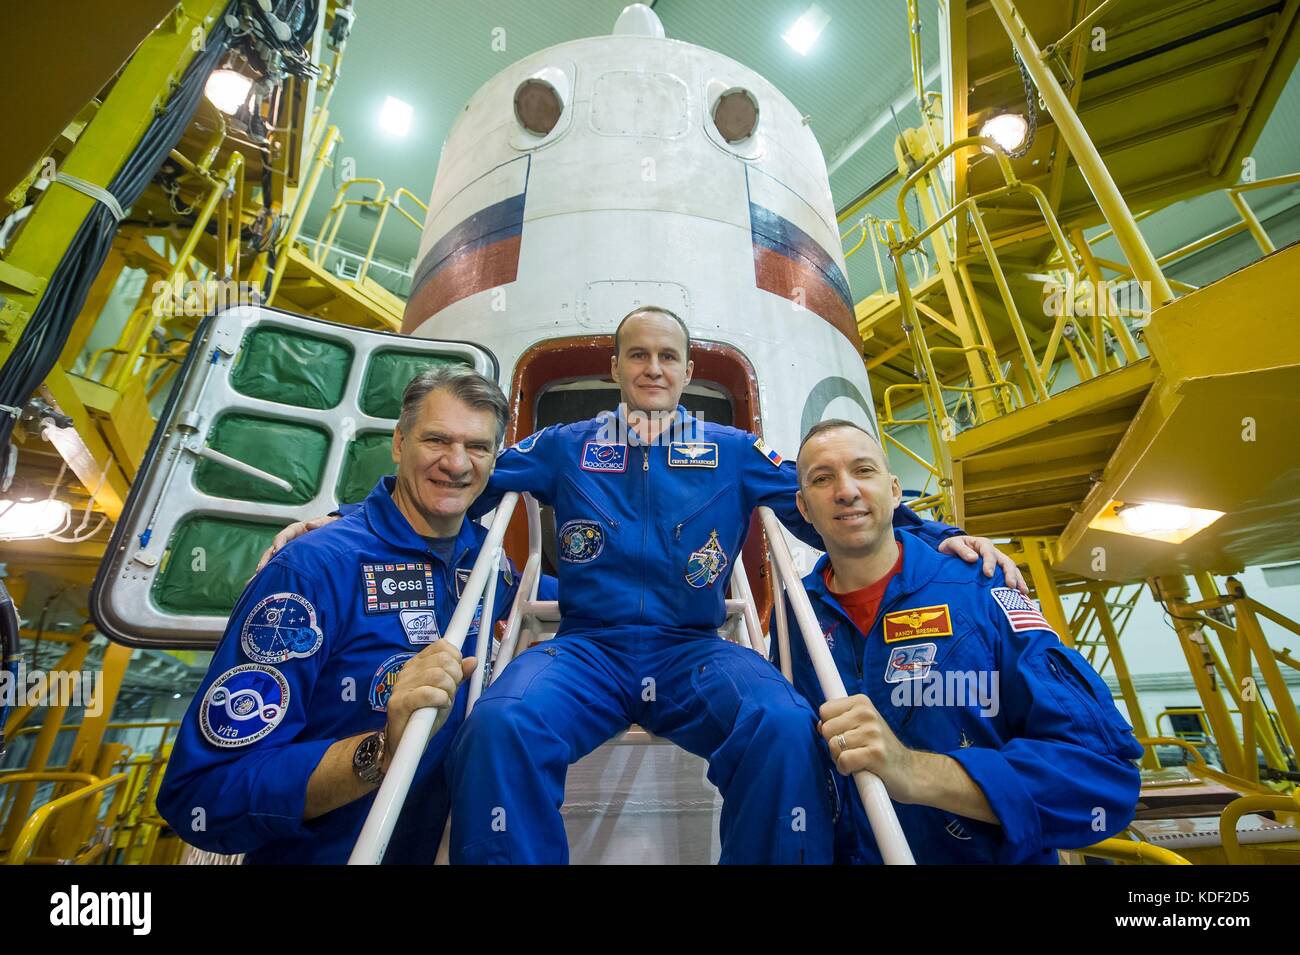 NASA International Space Station Expedition 52 prime crew members (L-R) Italian astronaut Paolo Nespoli of the European Space Agency, Russian cosmonaut Sergey Ryazanskiy of Roscosmos, and American astronaut Randy Bresnik pose in front of the Soyuz MS-05 spacecraft during their final pre-launch fit check dress rehearsal at the Baikonur Cosmodrome Integration Facility July 24, 2017 in Baikonur, Kazakhstan.    (photo by Andrey Shelepin  via Planetpix) Stock Photo